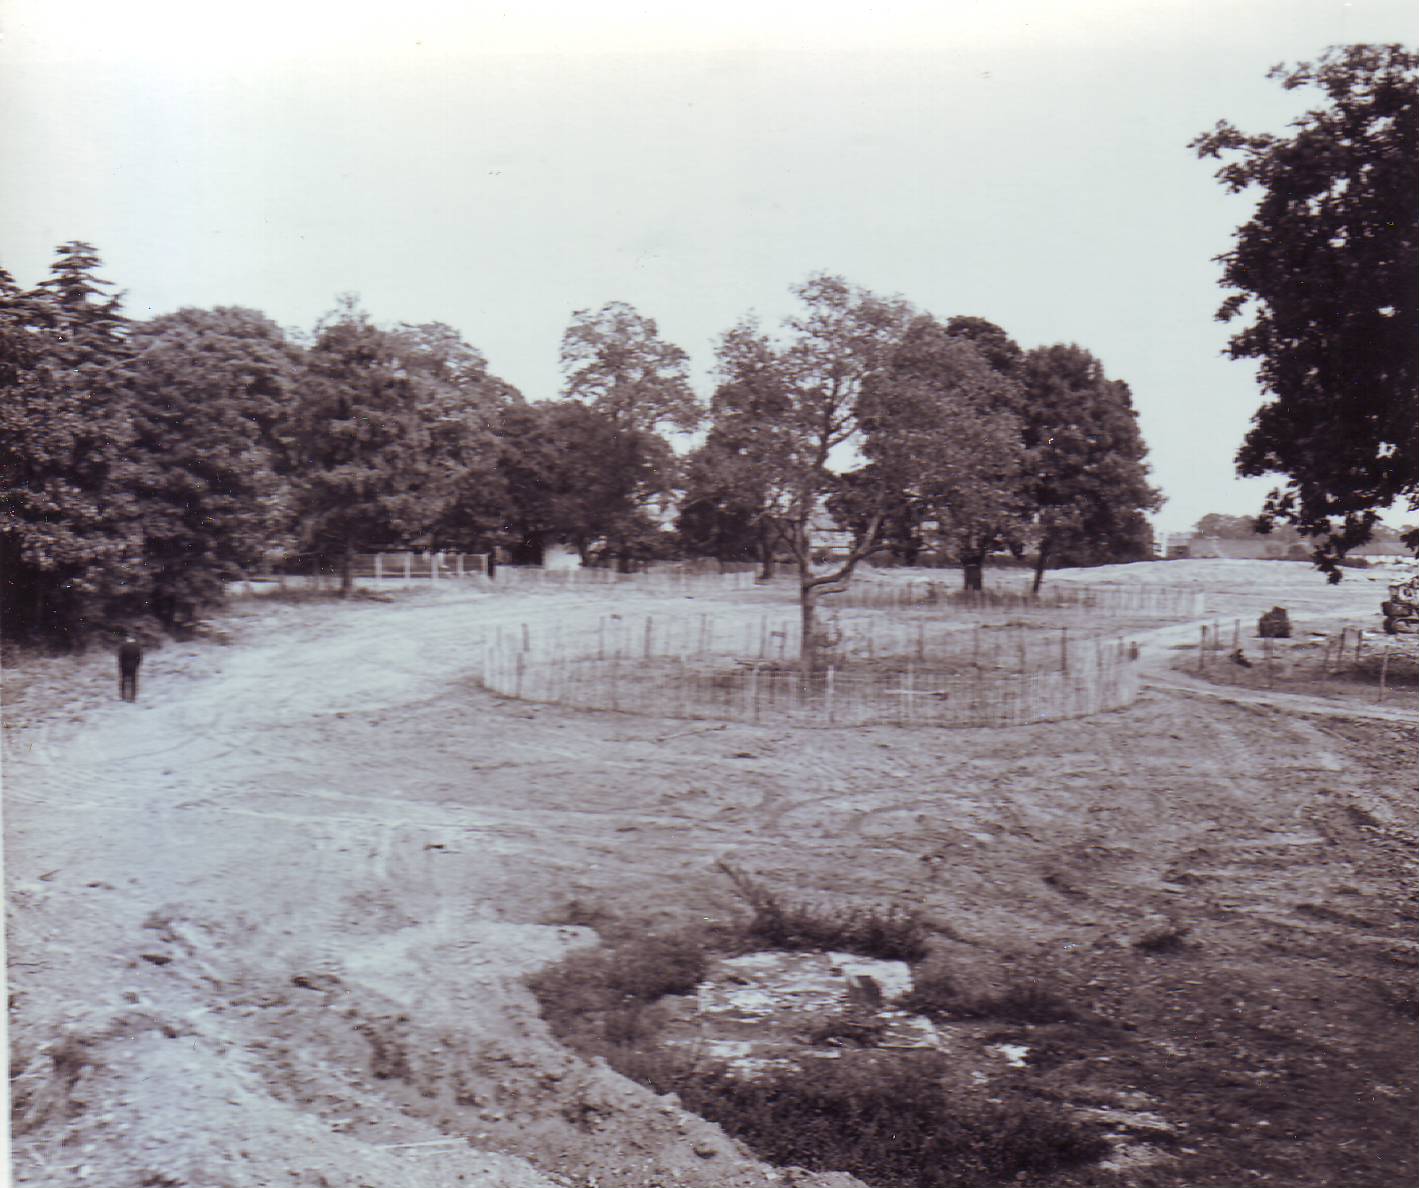 Retained trees by Crabwood House